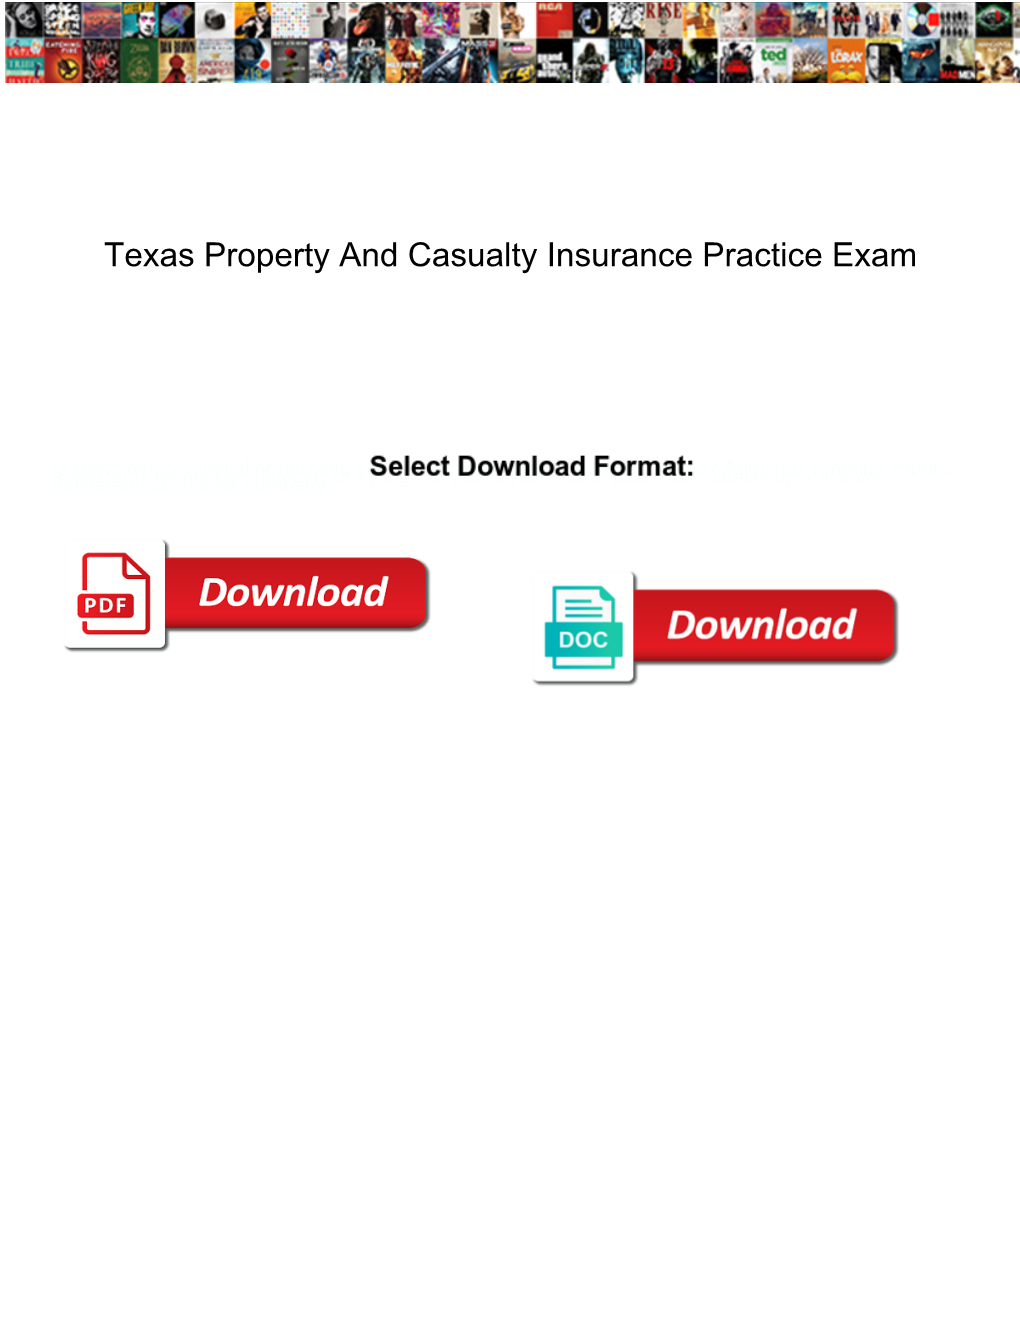 Texas Property and Casualty Insurance Practice Exam